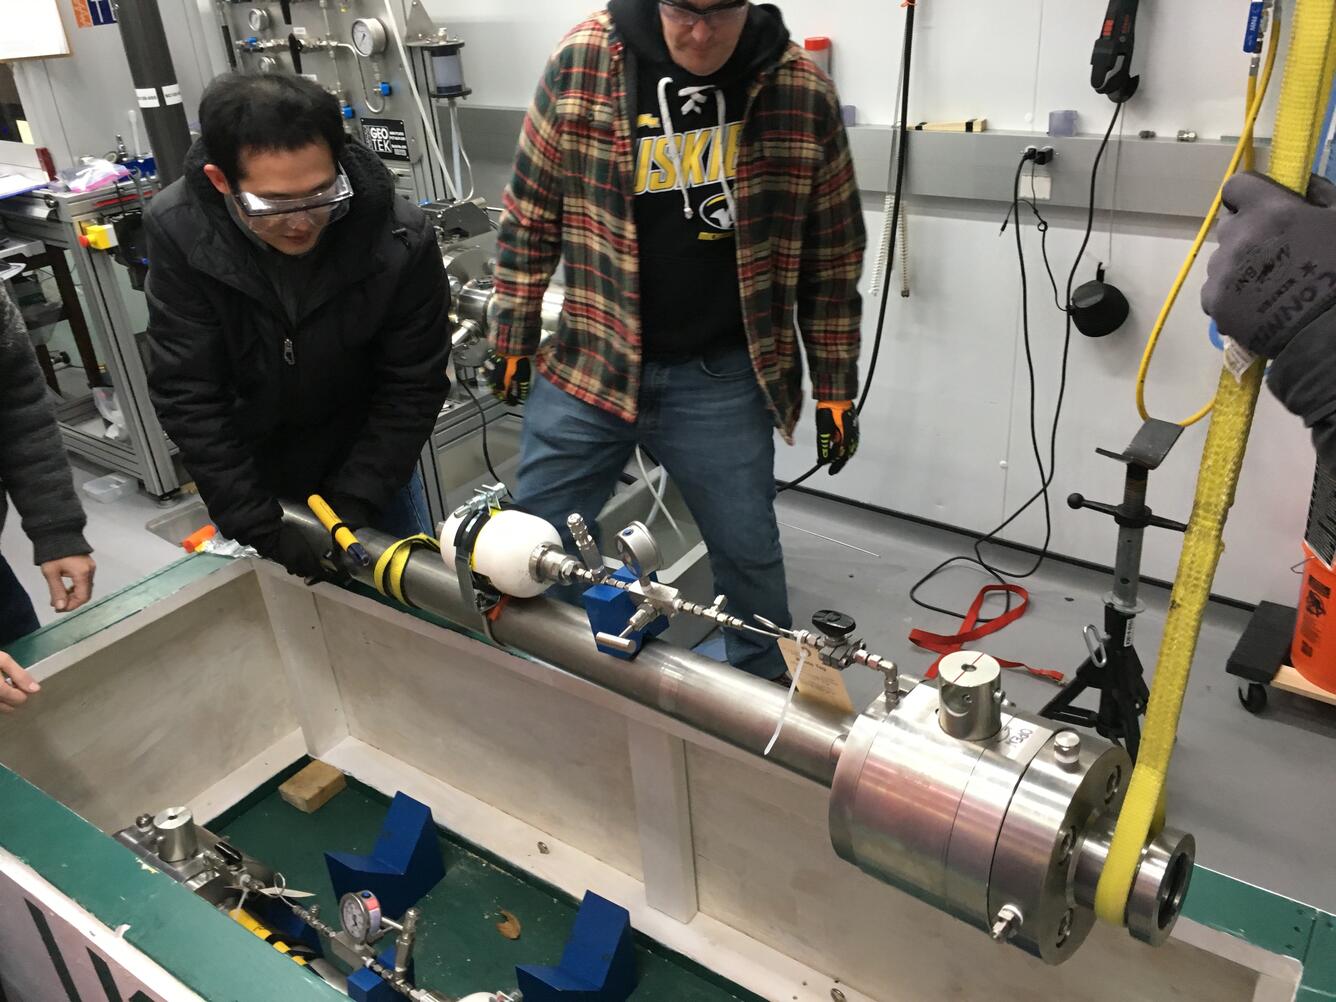  Junbong Jang and Stephen Phillips loading a pressure core chamber into a shipping box